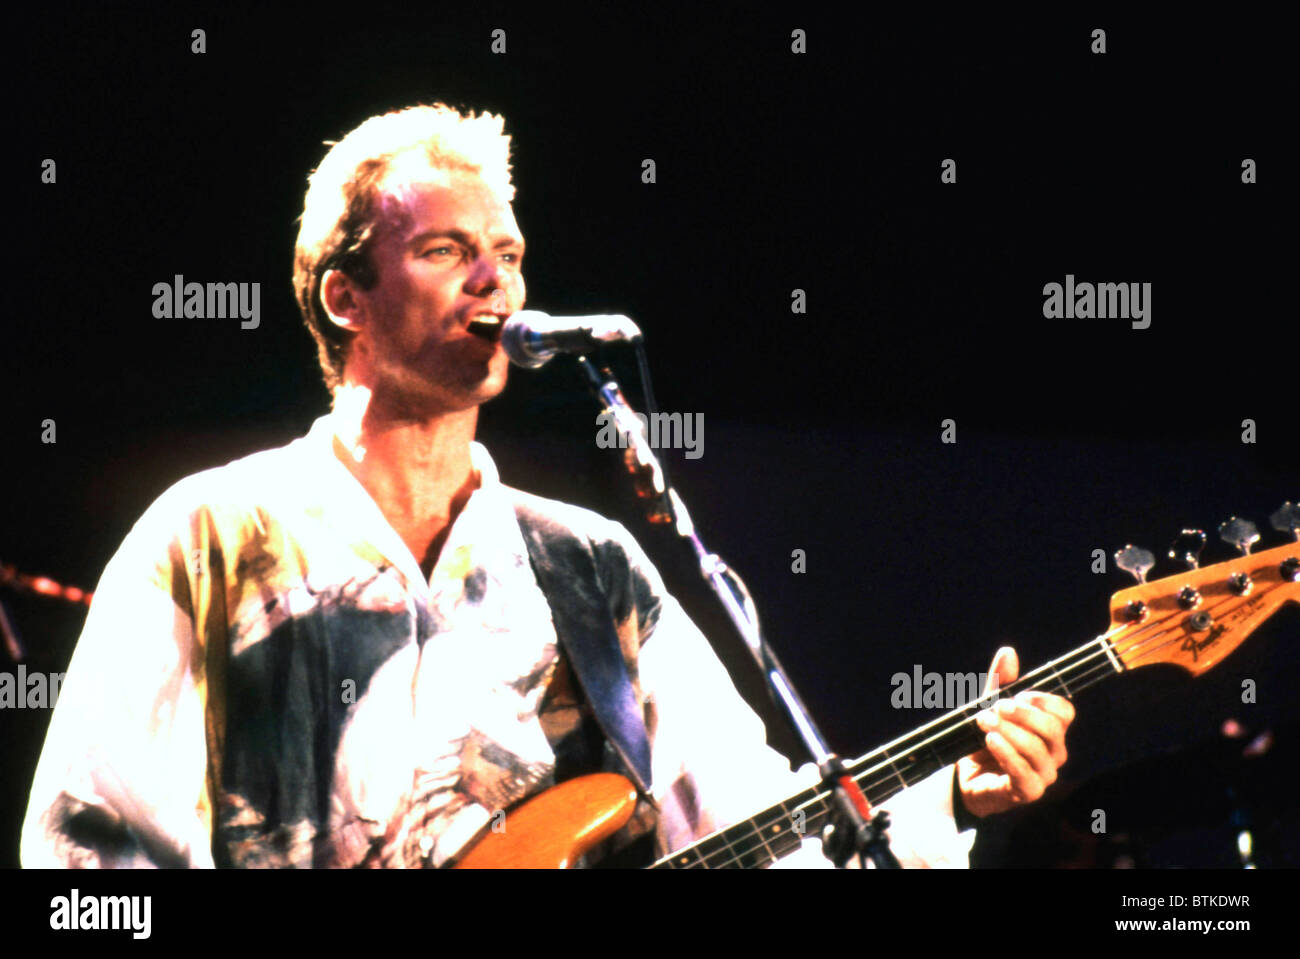 Sting performing with the Police at the concert for  Amnesty International, Giant Stadium, New Jersey, June 15, 1986, Stock Photo